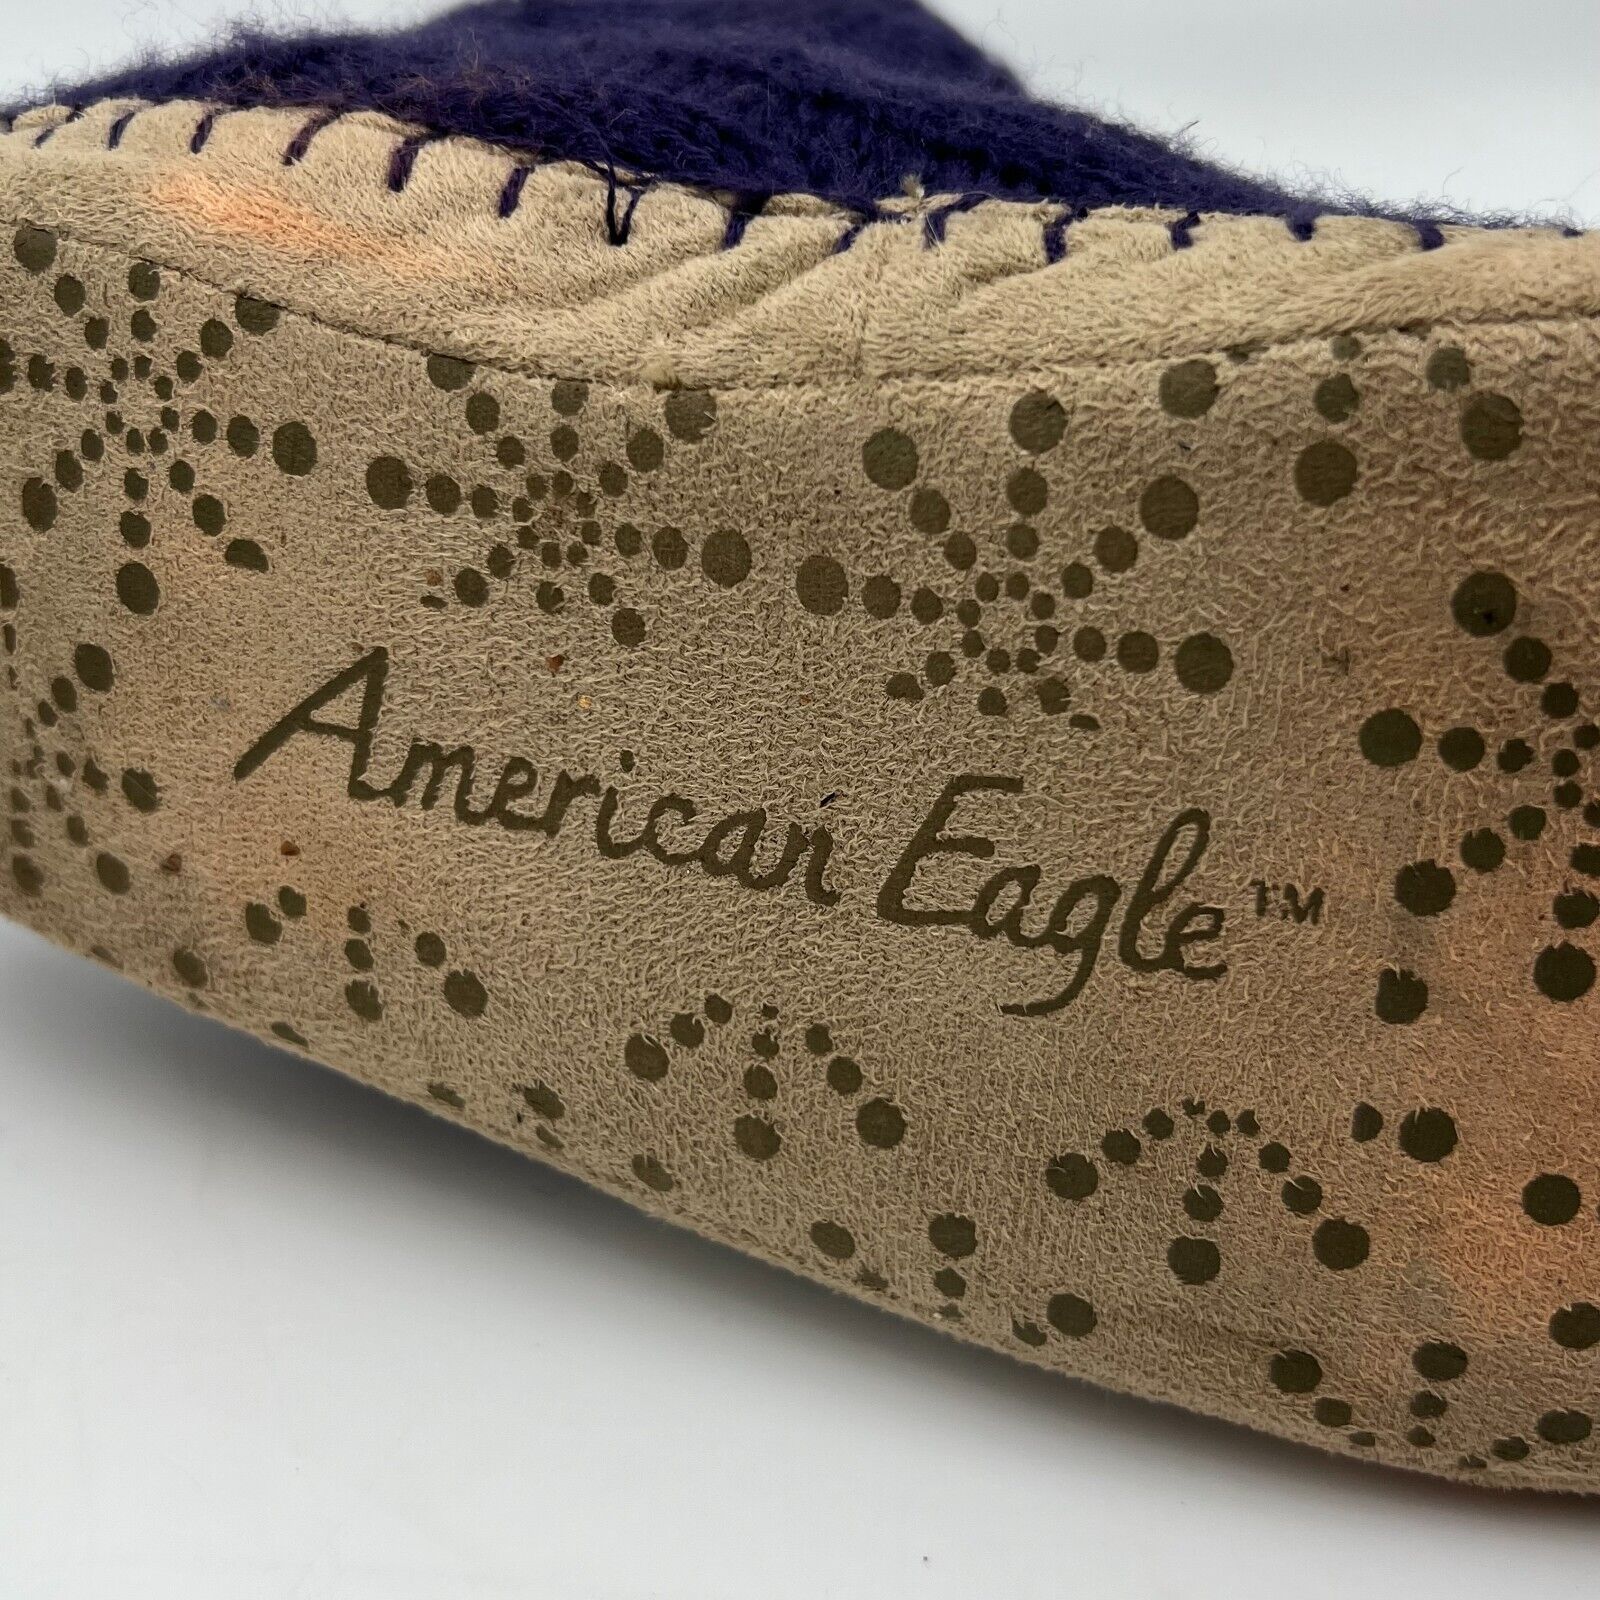 American Eagle Knit Slipper Boots Draw String Purple Puff Ball Womens Size 9-10